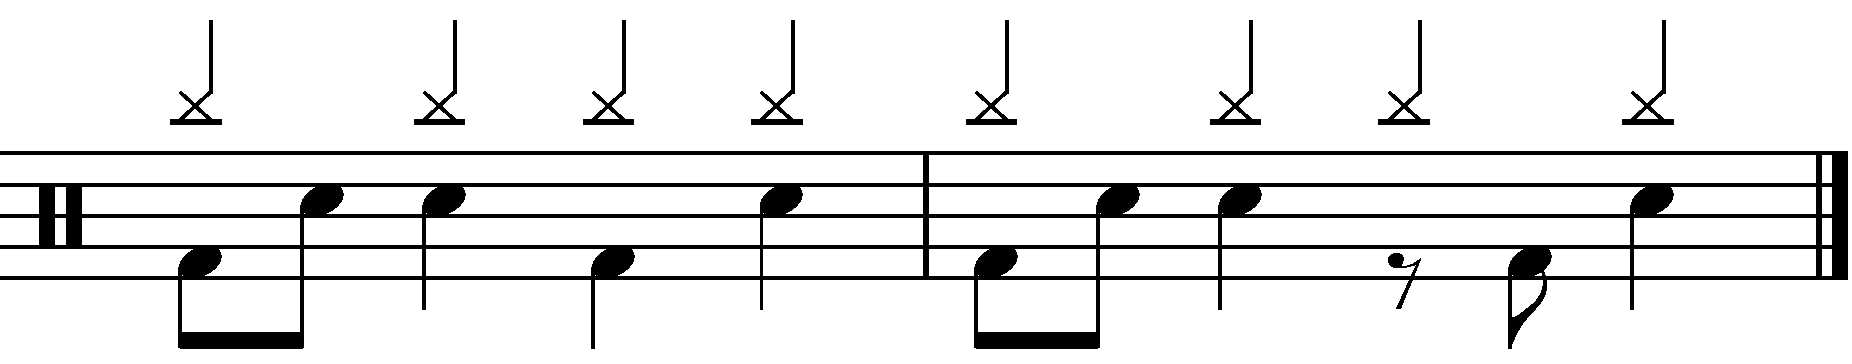 Additional 2 Bar Grooves - 7